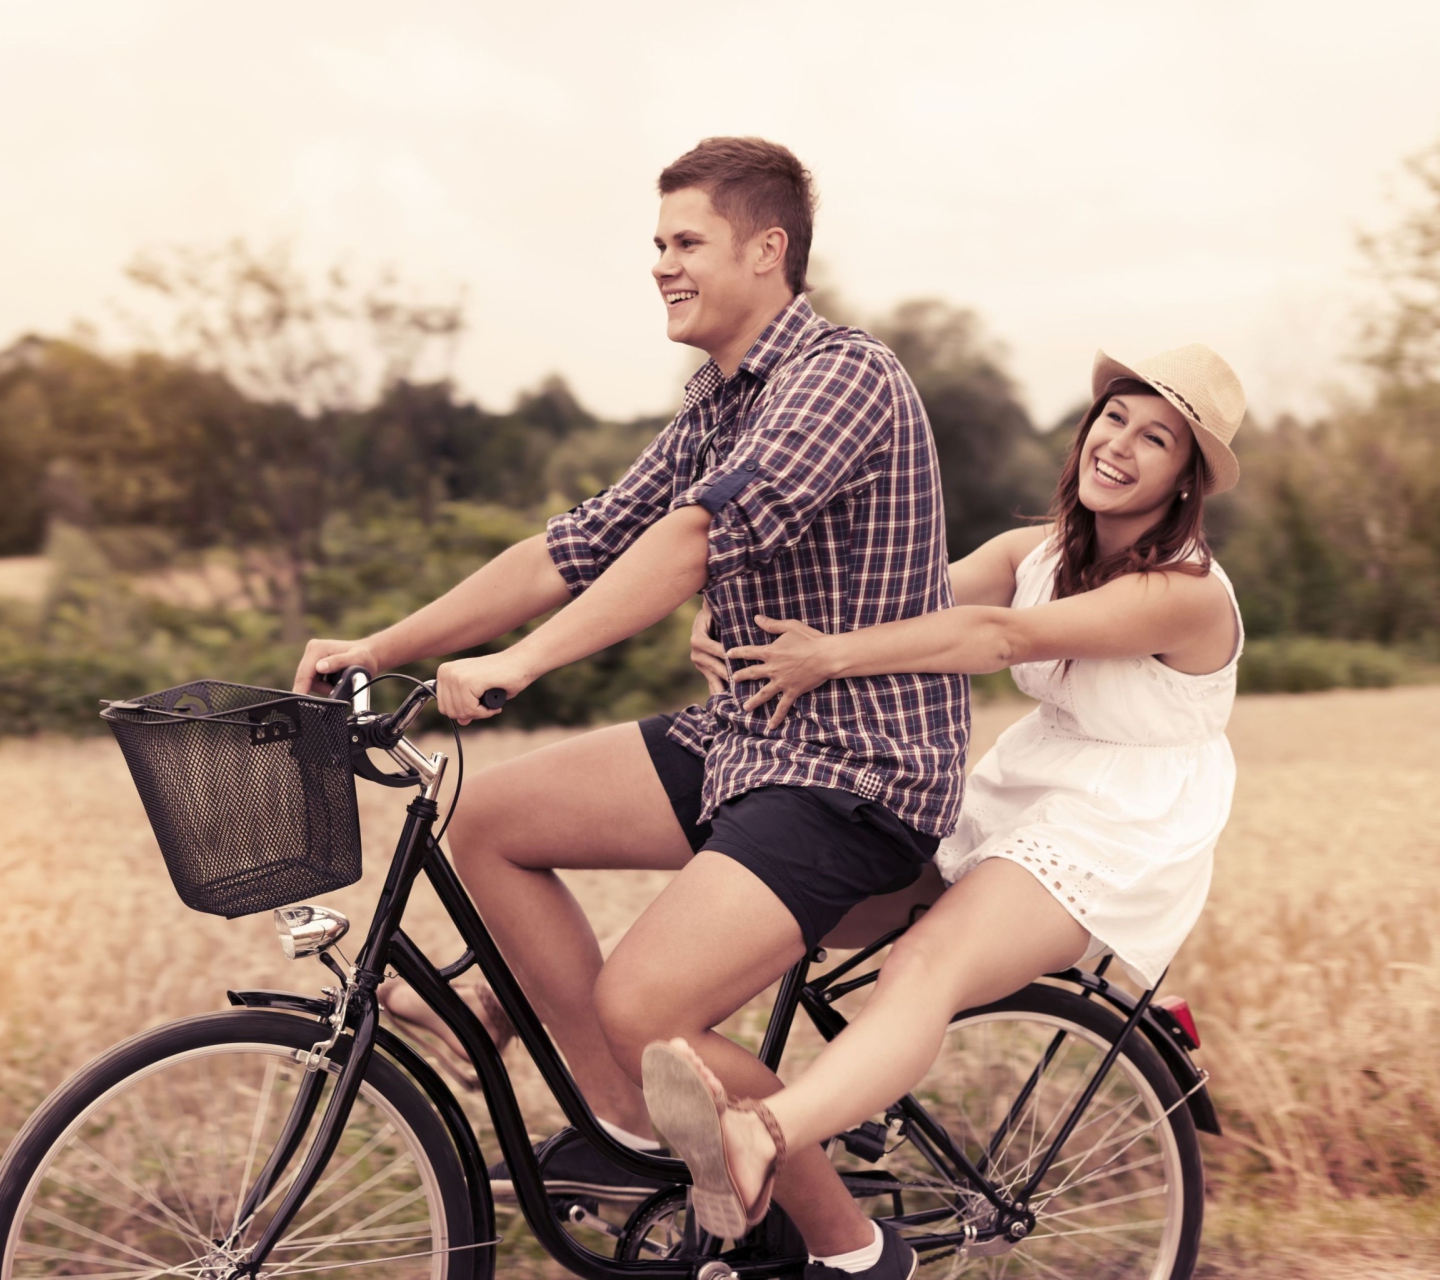 Couple On Bicycle wallpaper 1440x1280